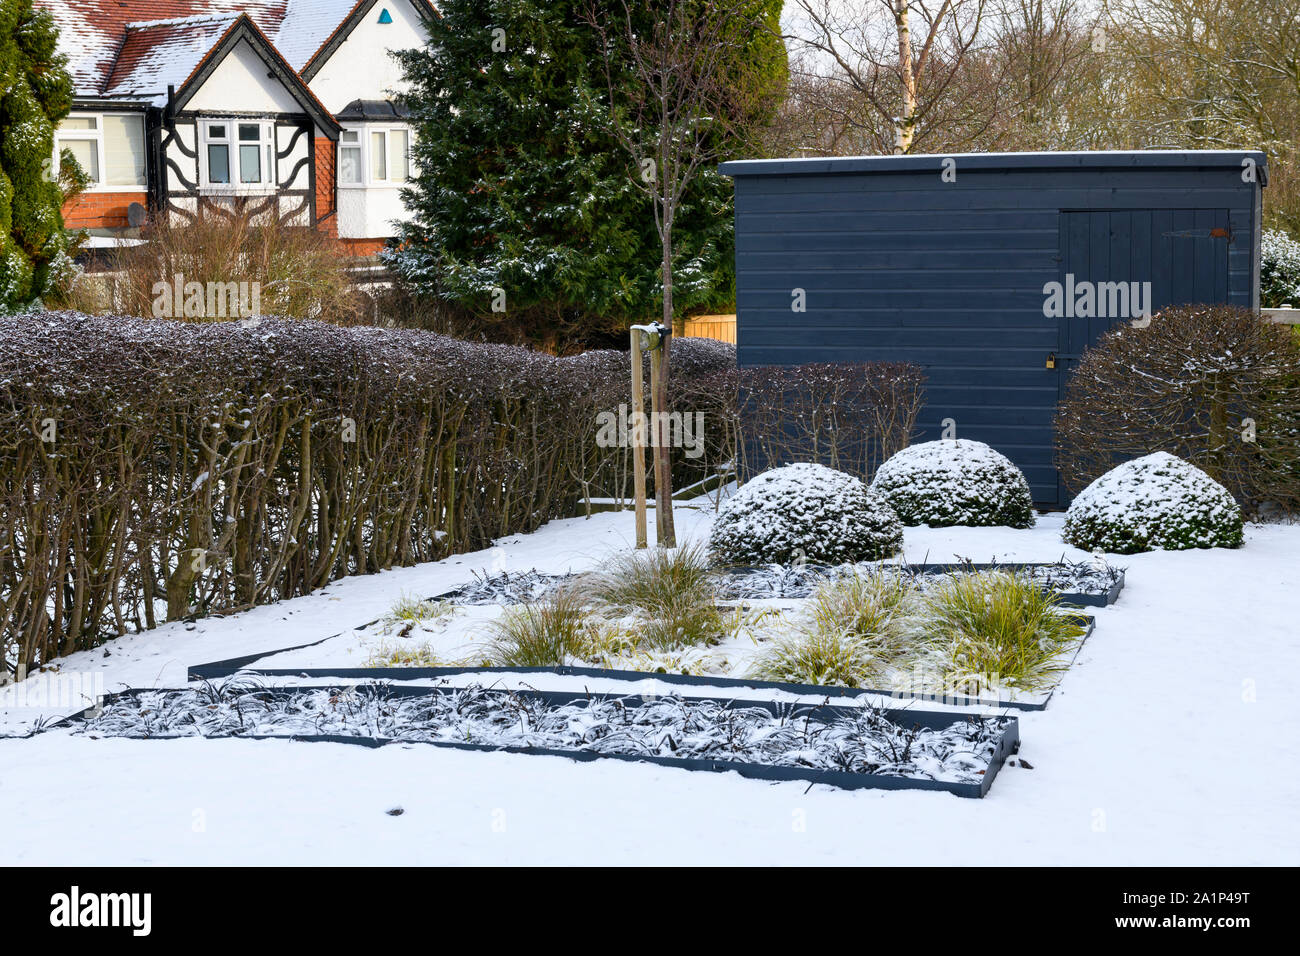 Stylish, contemporary design, landscaping & planting (grasses & yew) in sunken beds by blue shed - snow covered winter garden, Yorkshire, England, UK. Stock Photo